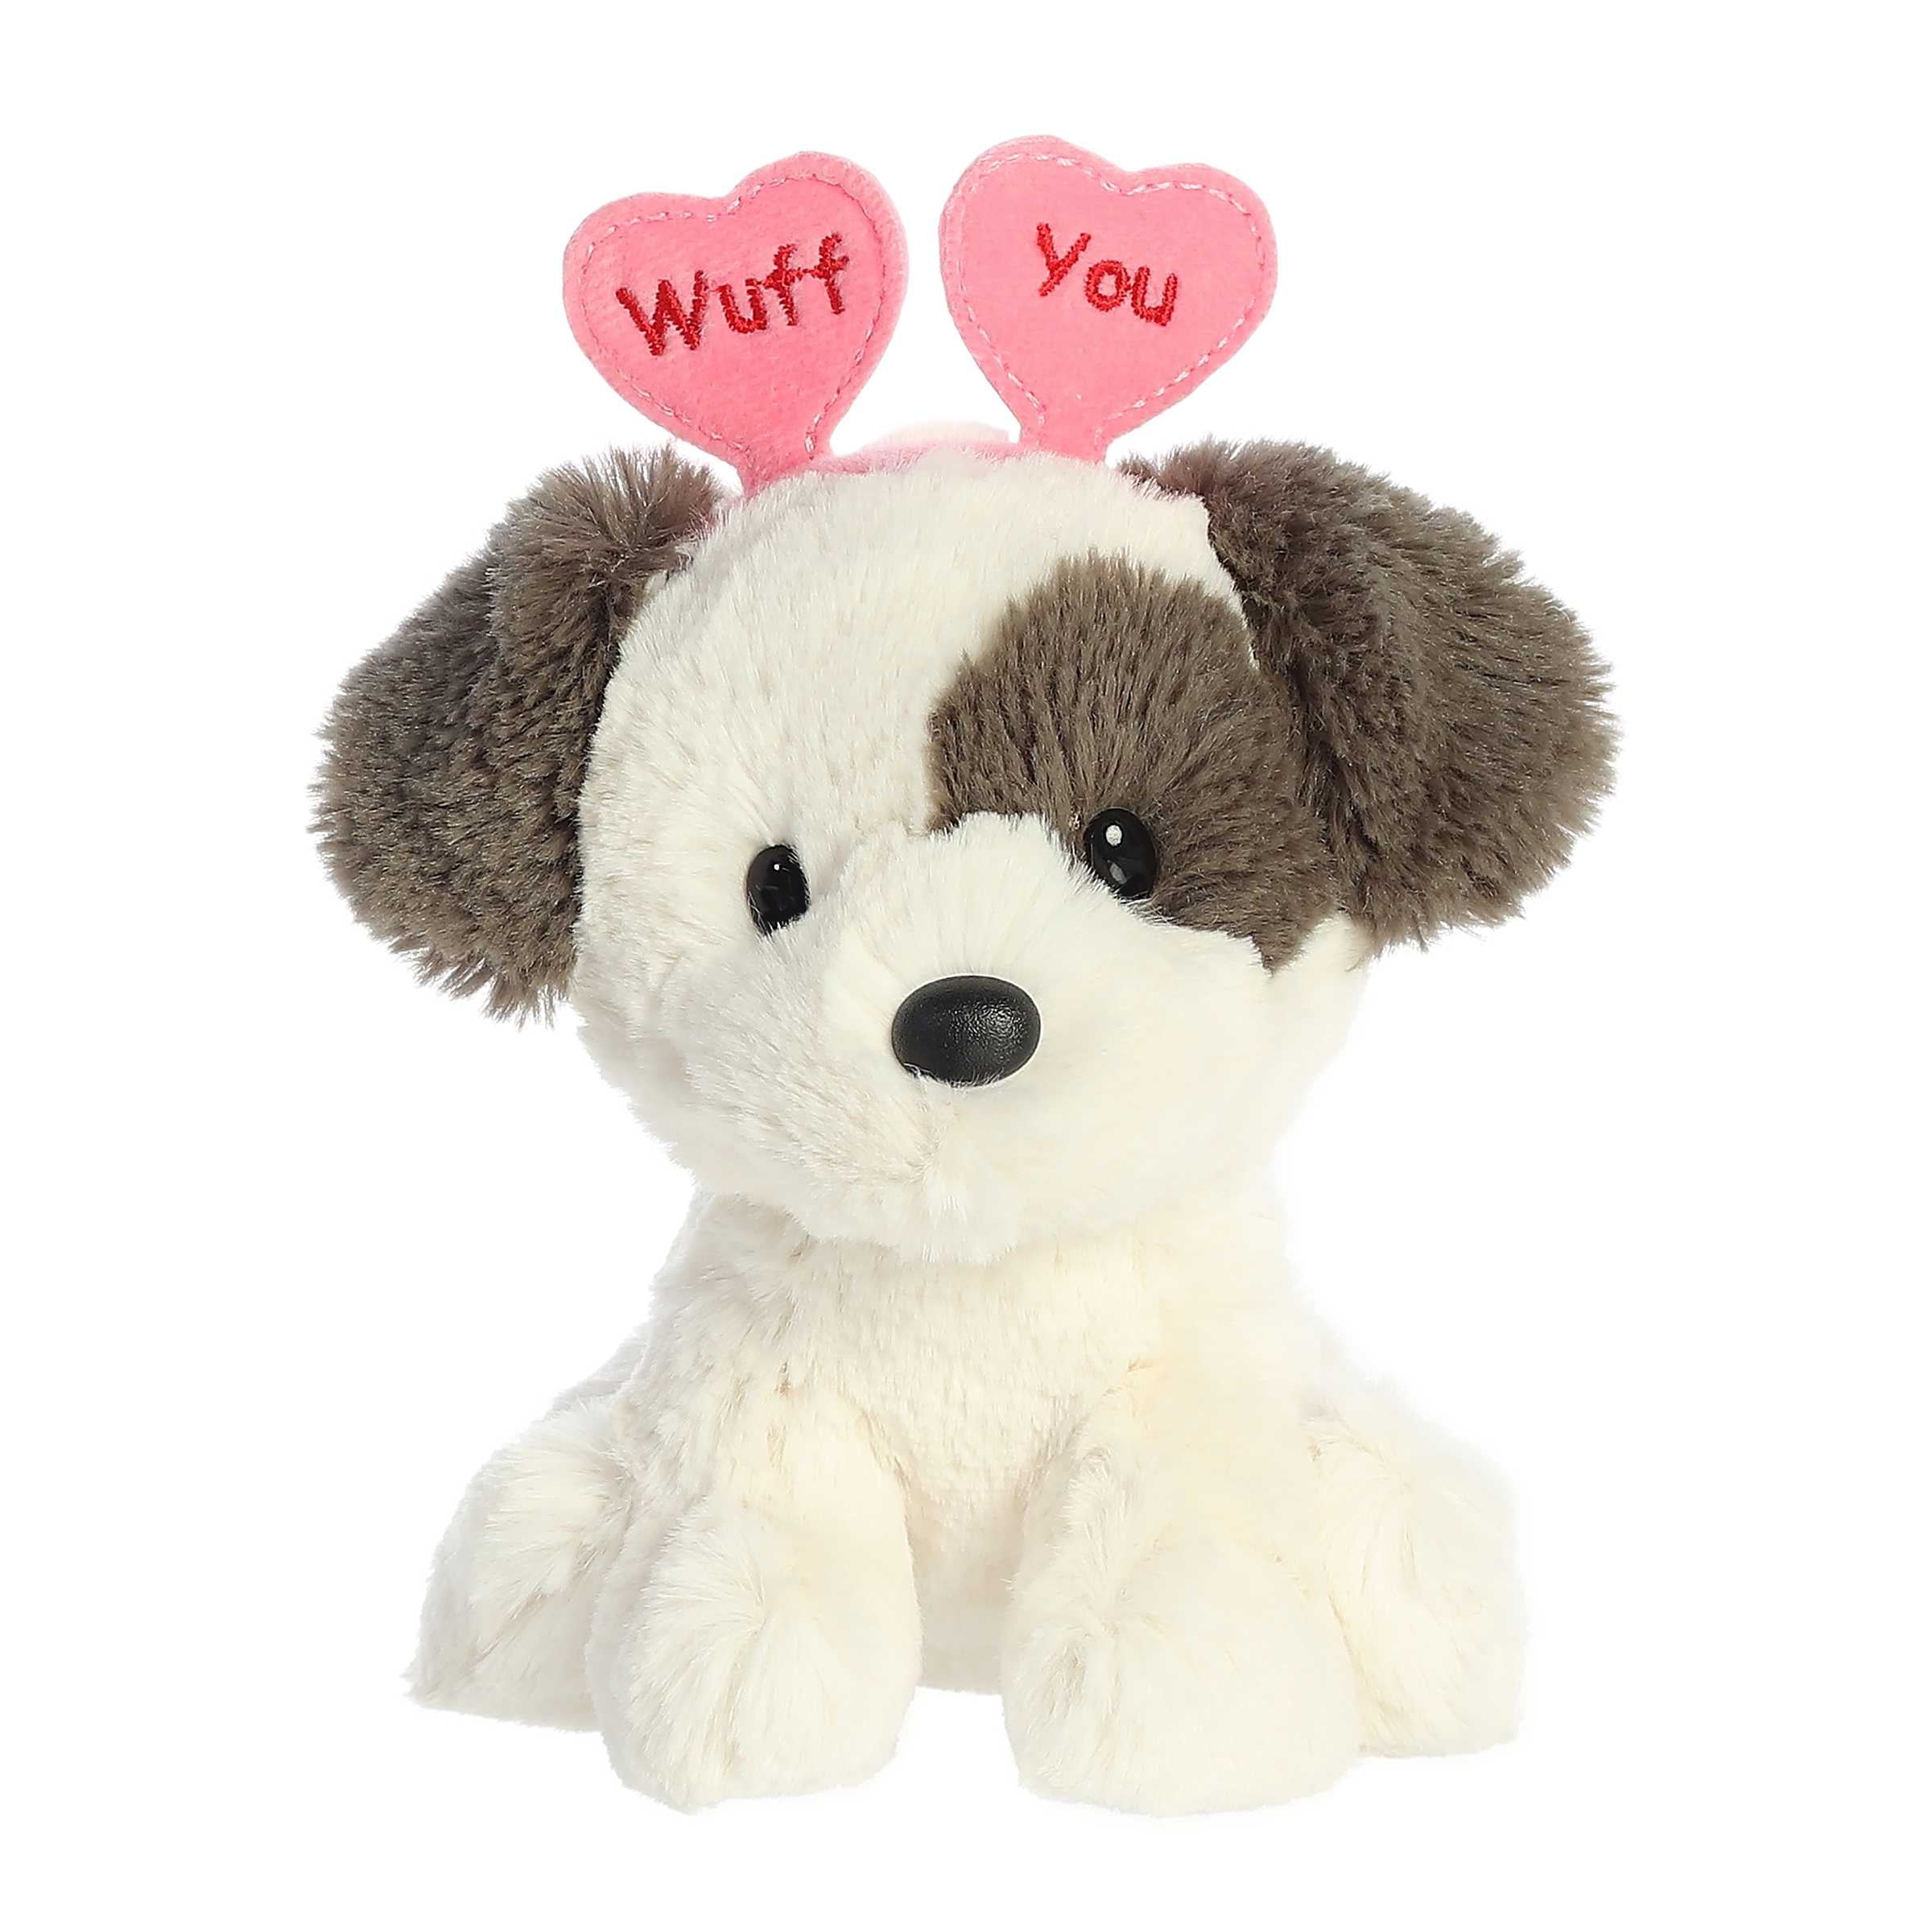 Terrier plush from Love On The Mind, adorned with a 'Wuff You' heart headband, capturing the essence of loving affection